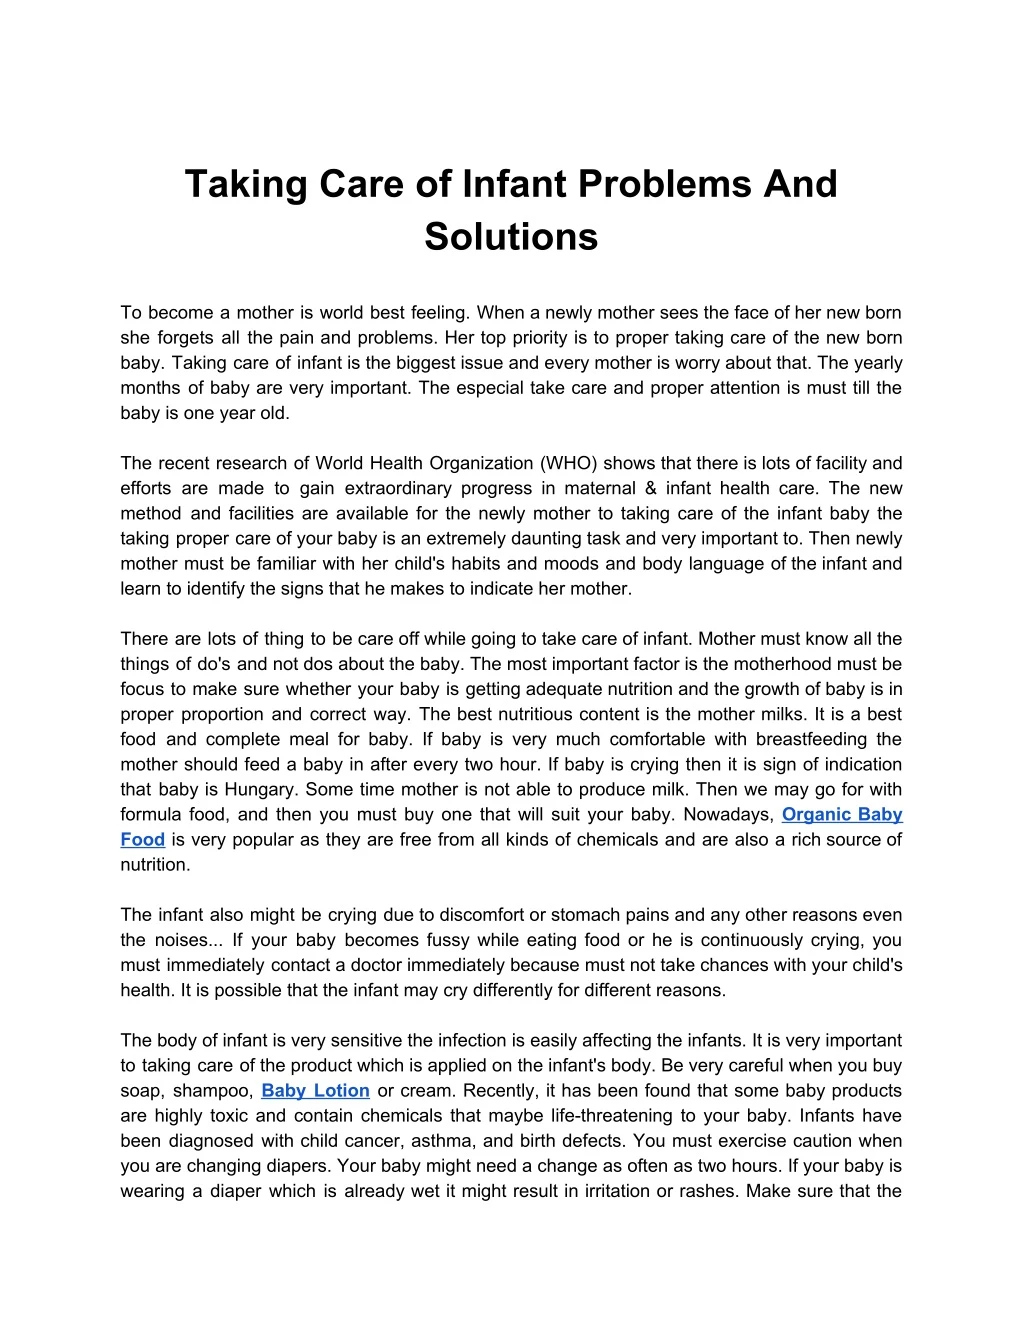 taking care of infant problems and solutions